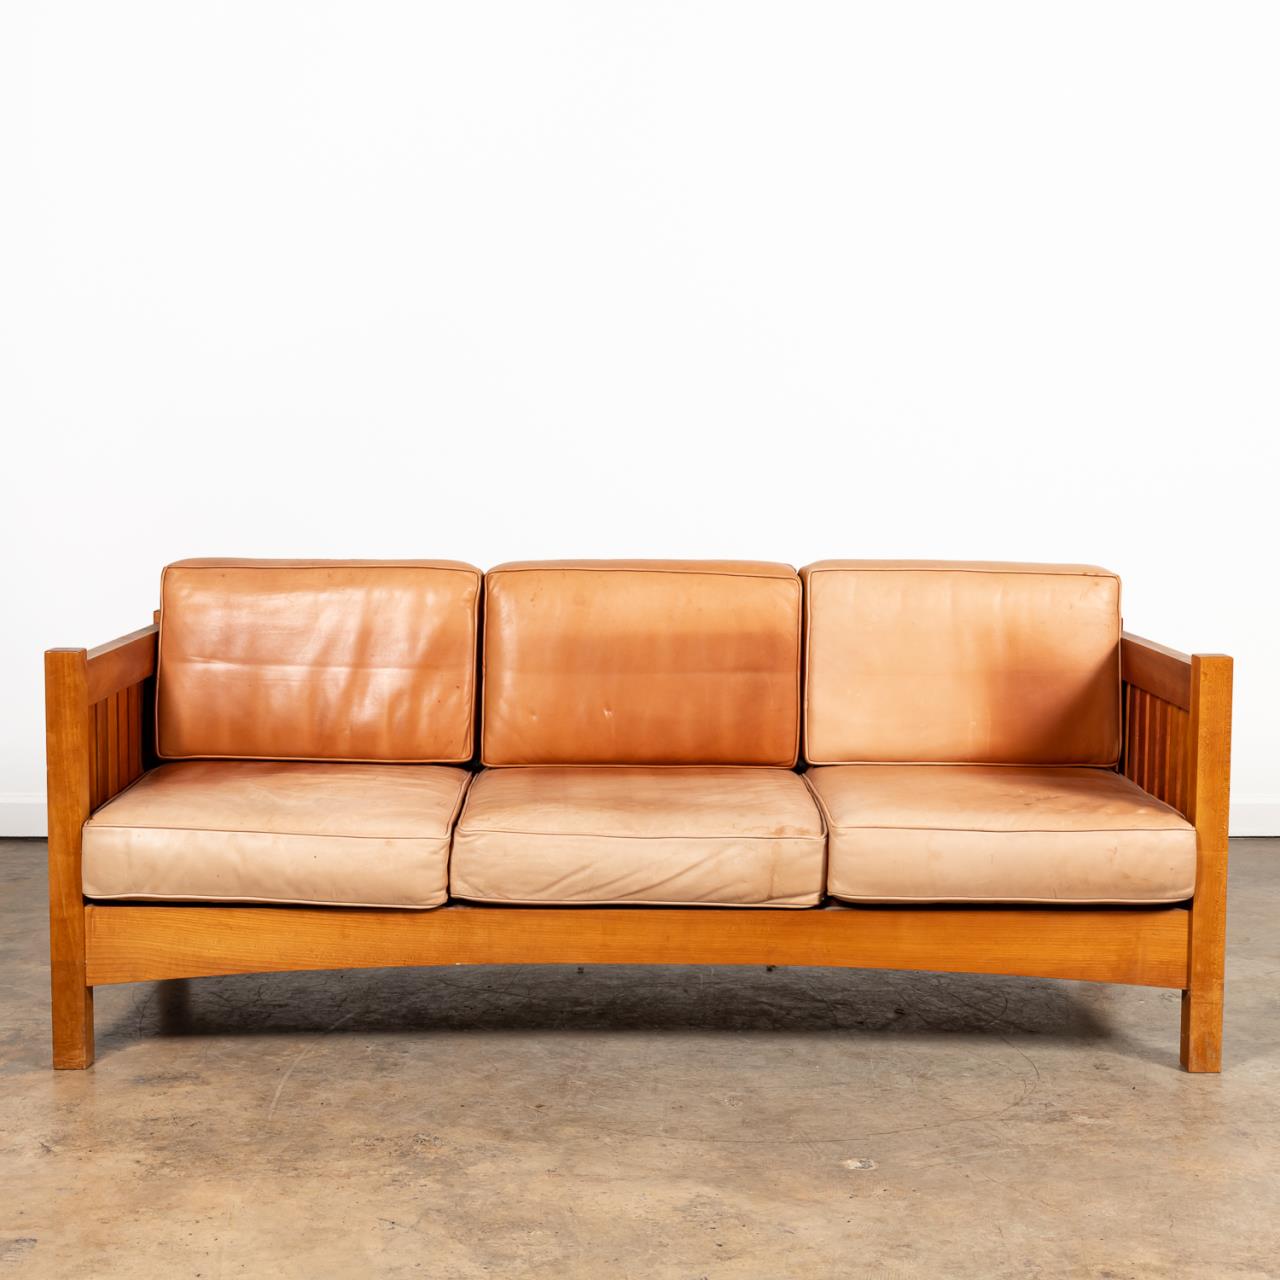 STICKLEY-STYLE LEATHER CUSHION